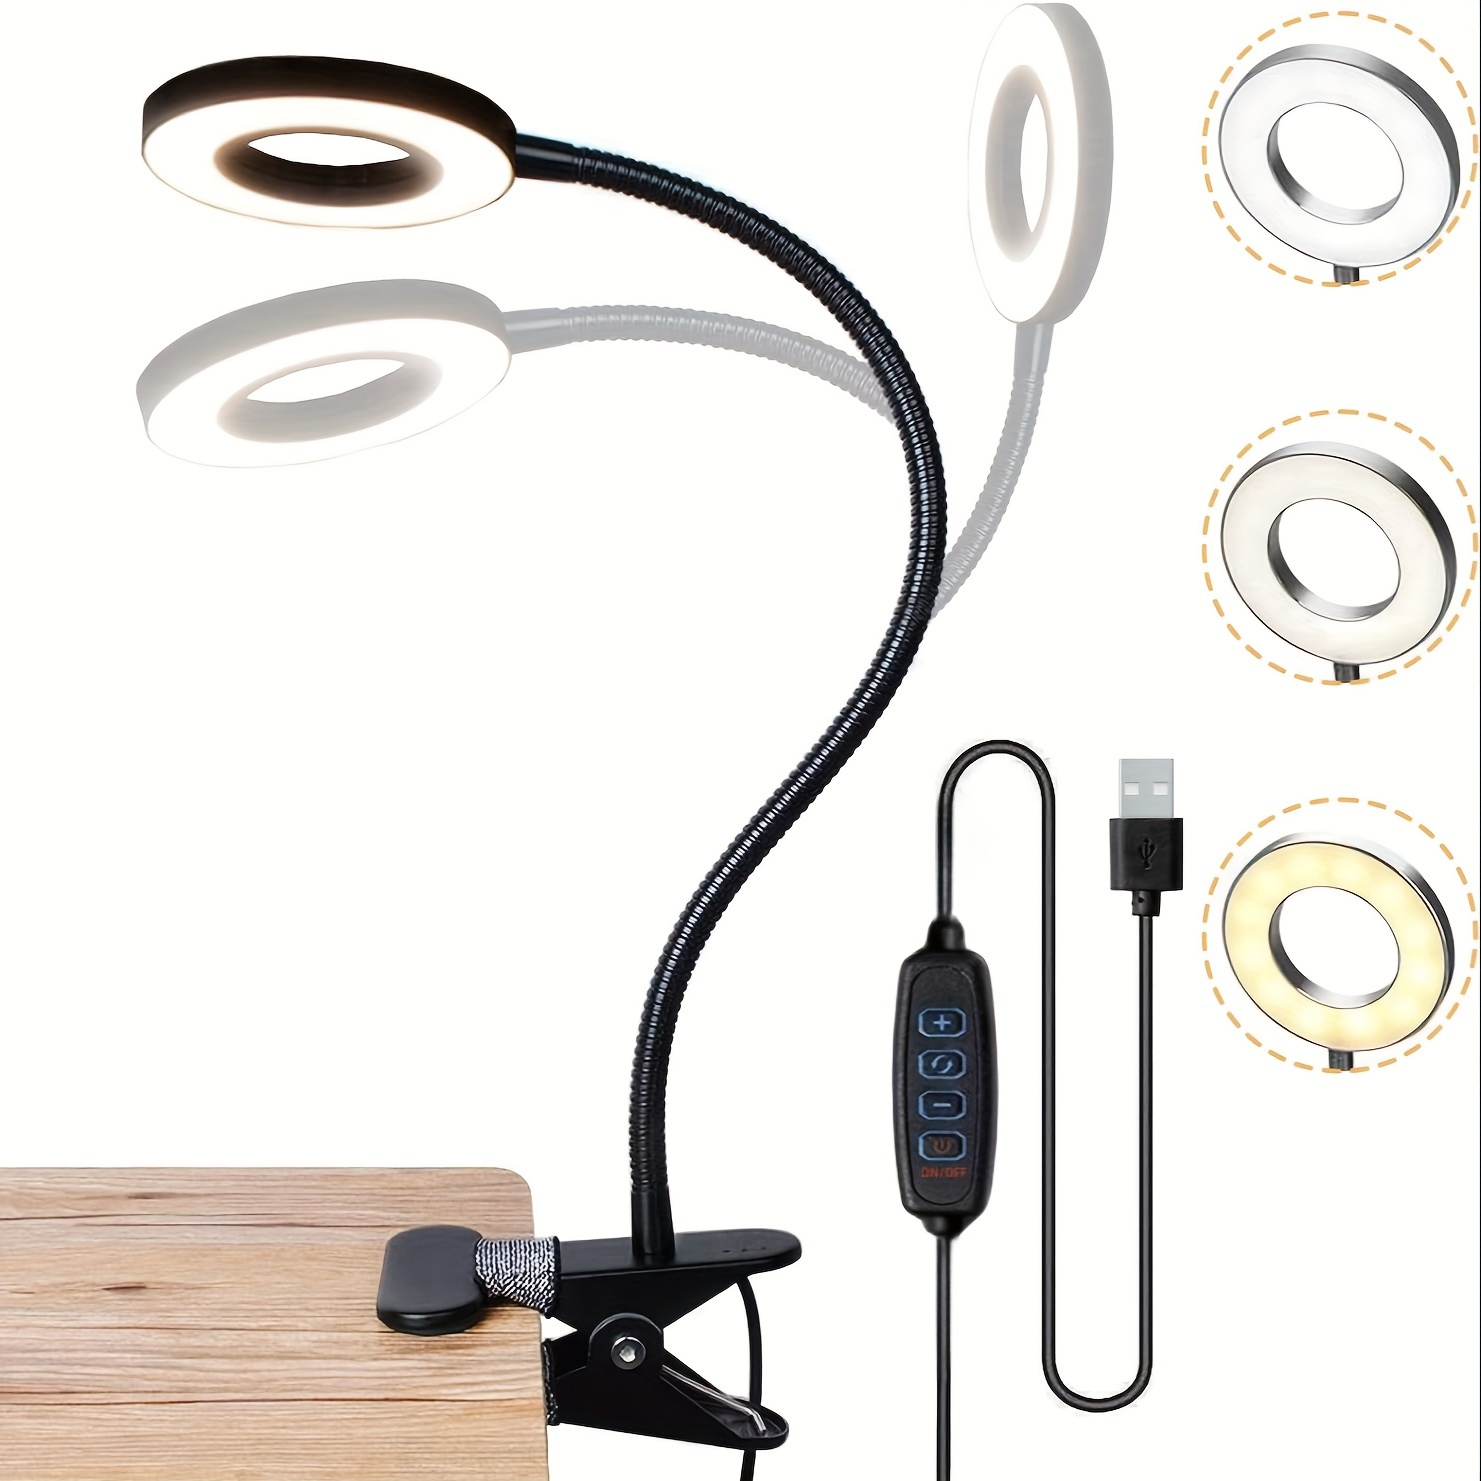 

1pc Flexible Gooseneck Led Desk Lamp With Clamp And Magnifying Glass, Usb Powered Eye-care Reading Light, Portable Table Light For Manicure, Close Work, And Seniors - No Battery Included